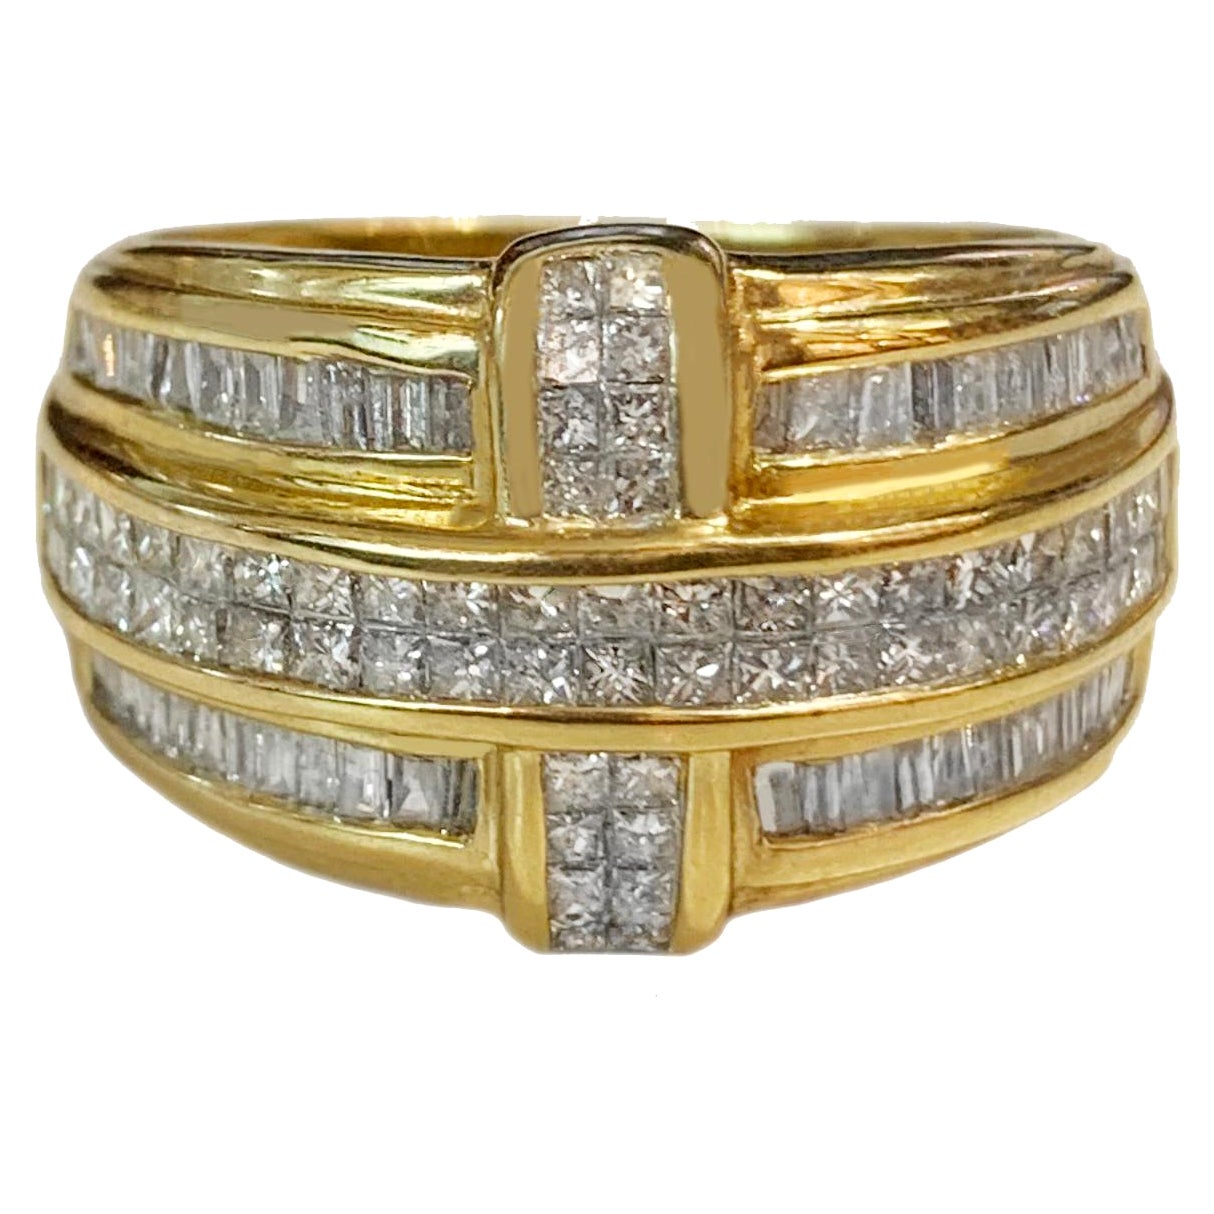 Sparkle 14k Yellow Gold Ring with 2.75ct Diamonds, VS/G